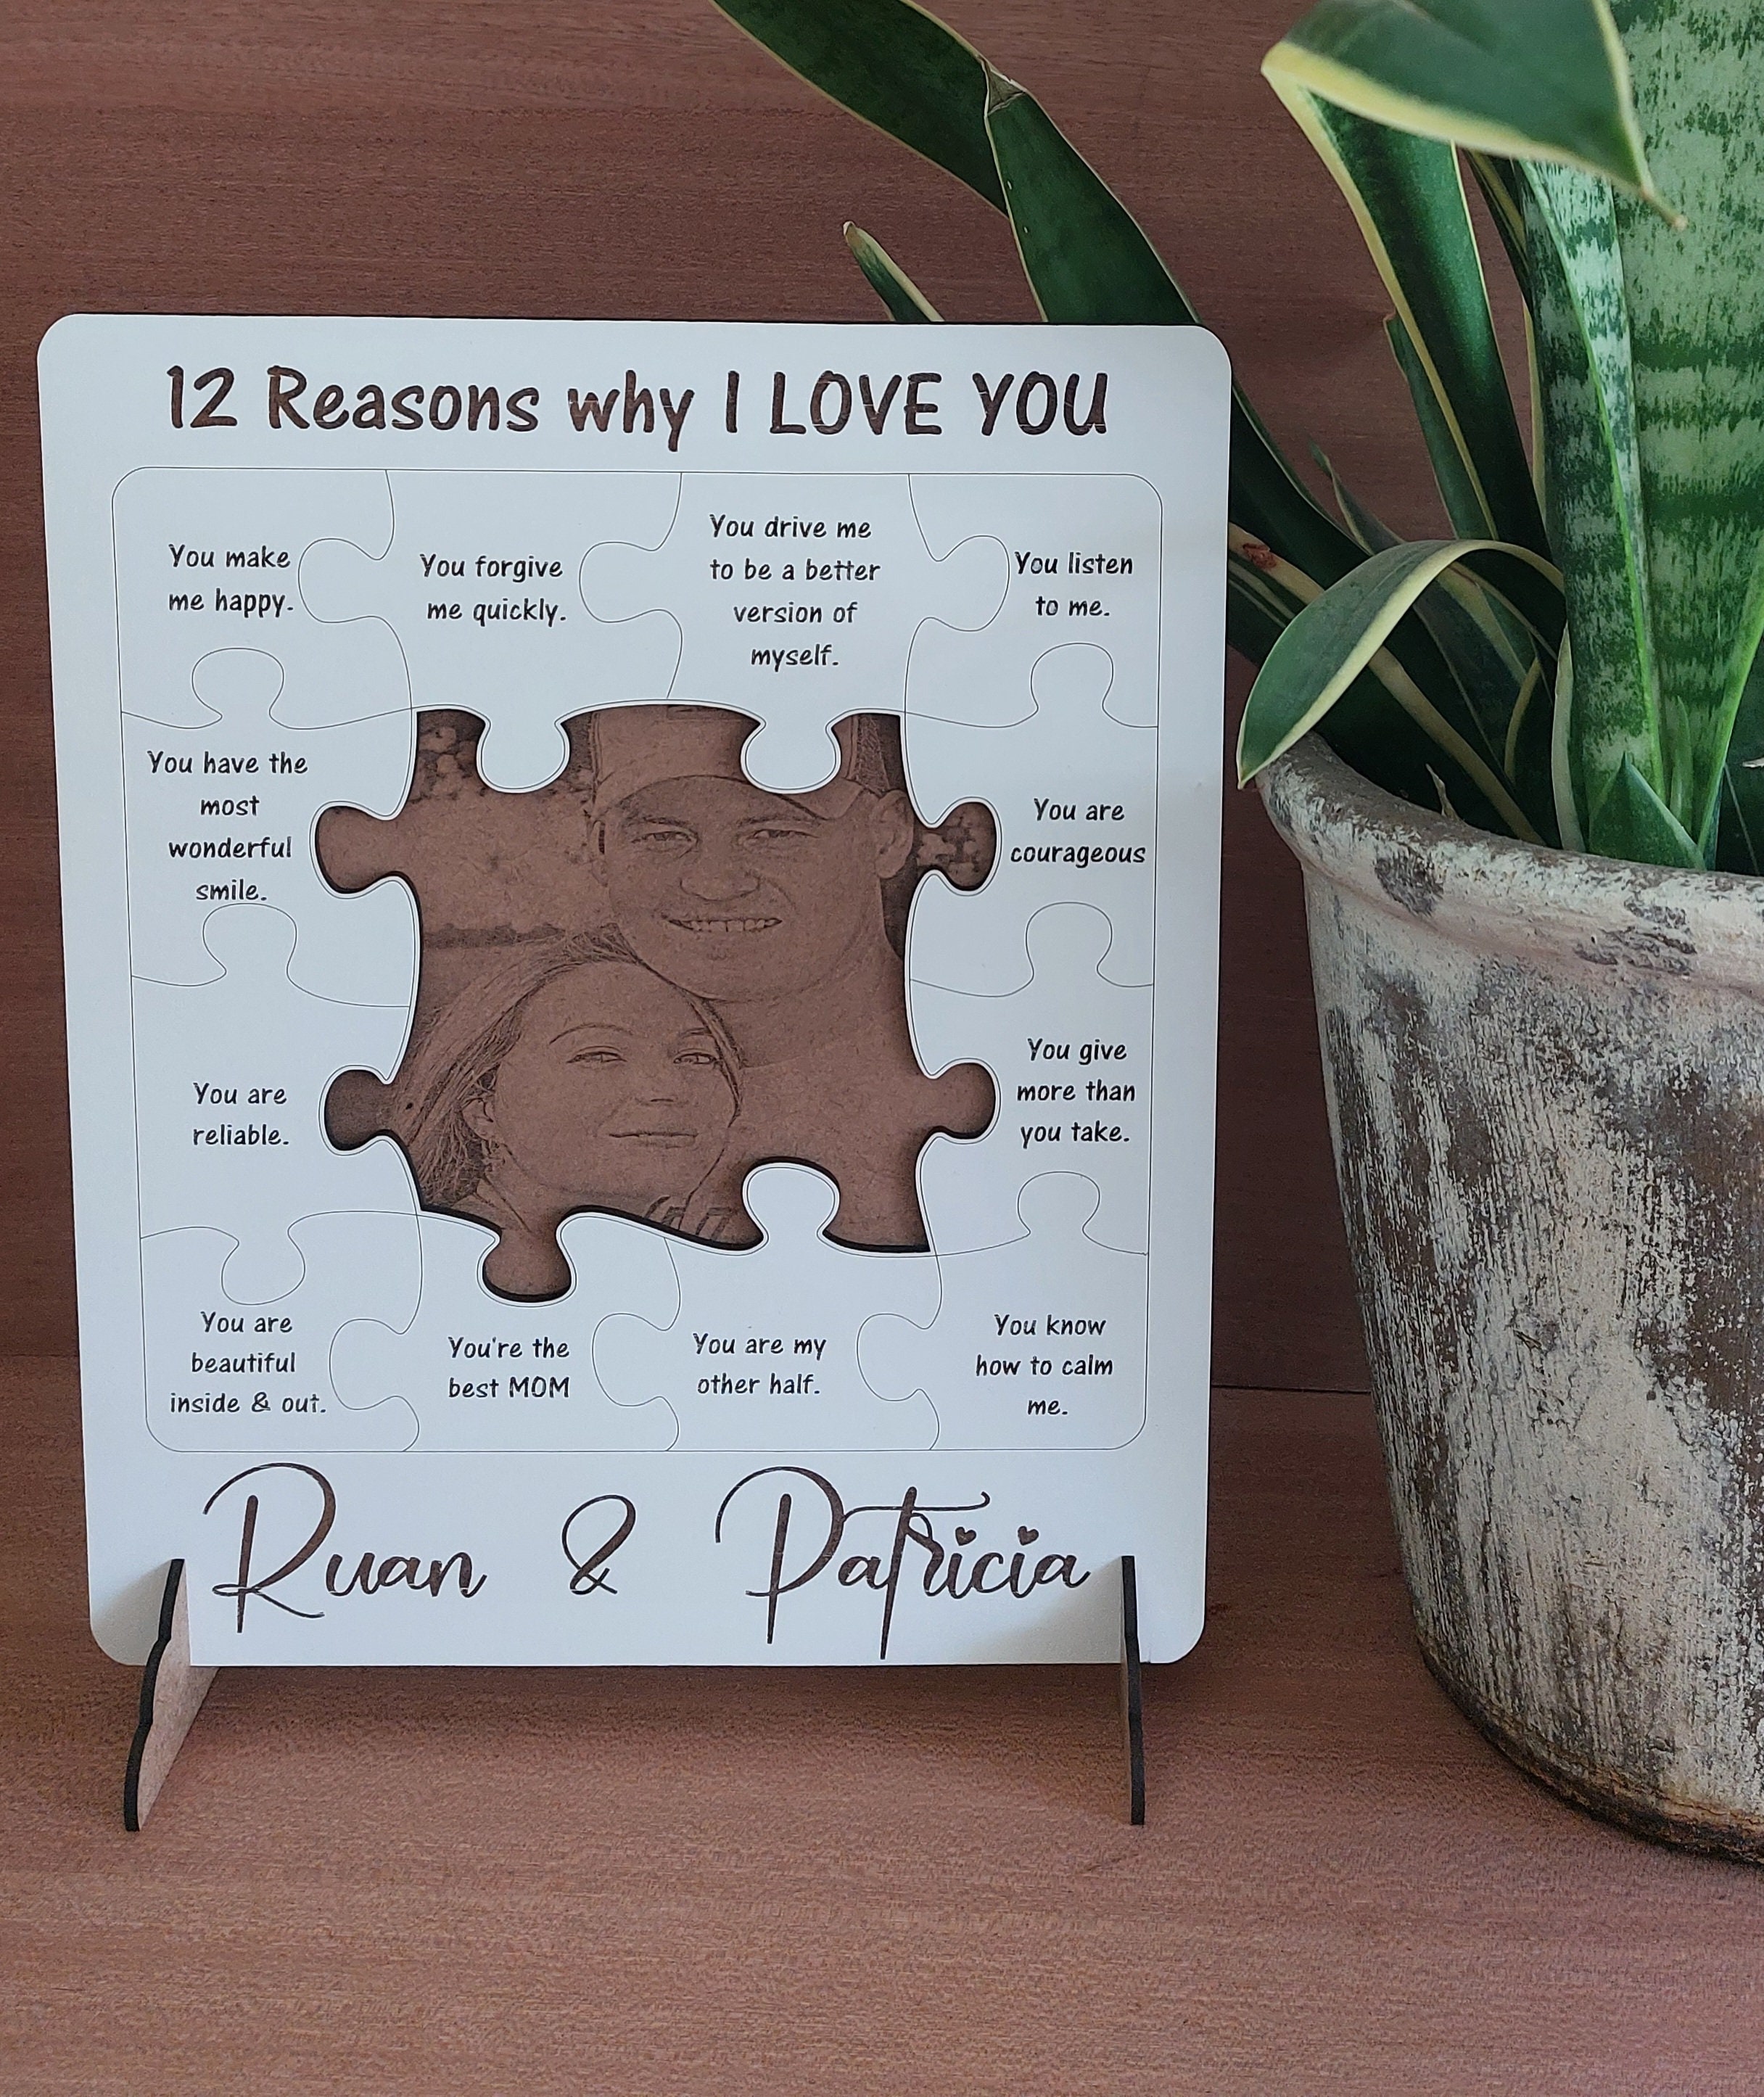 Reasons Why I Love You Puzzle, 1 Year Anniversary Gifts for